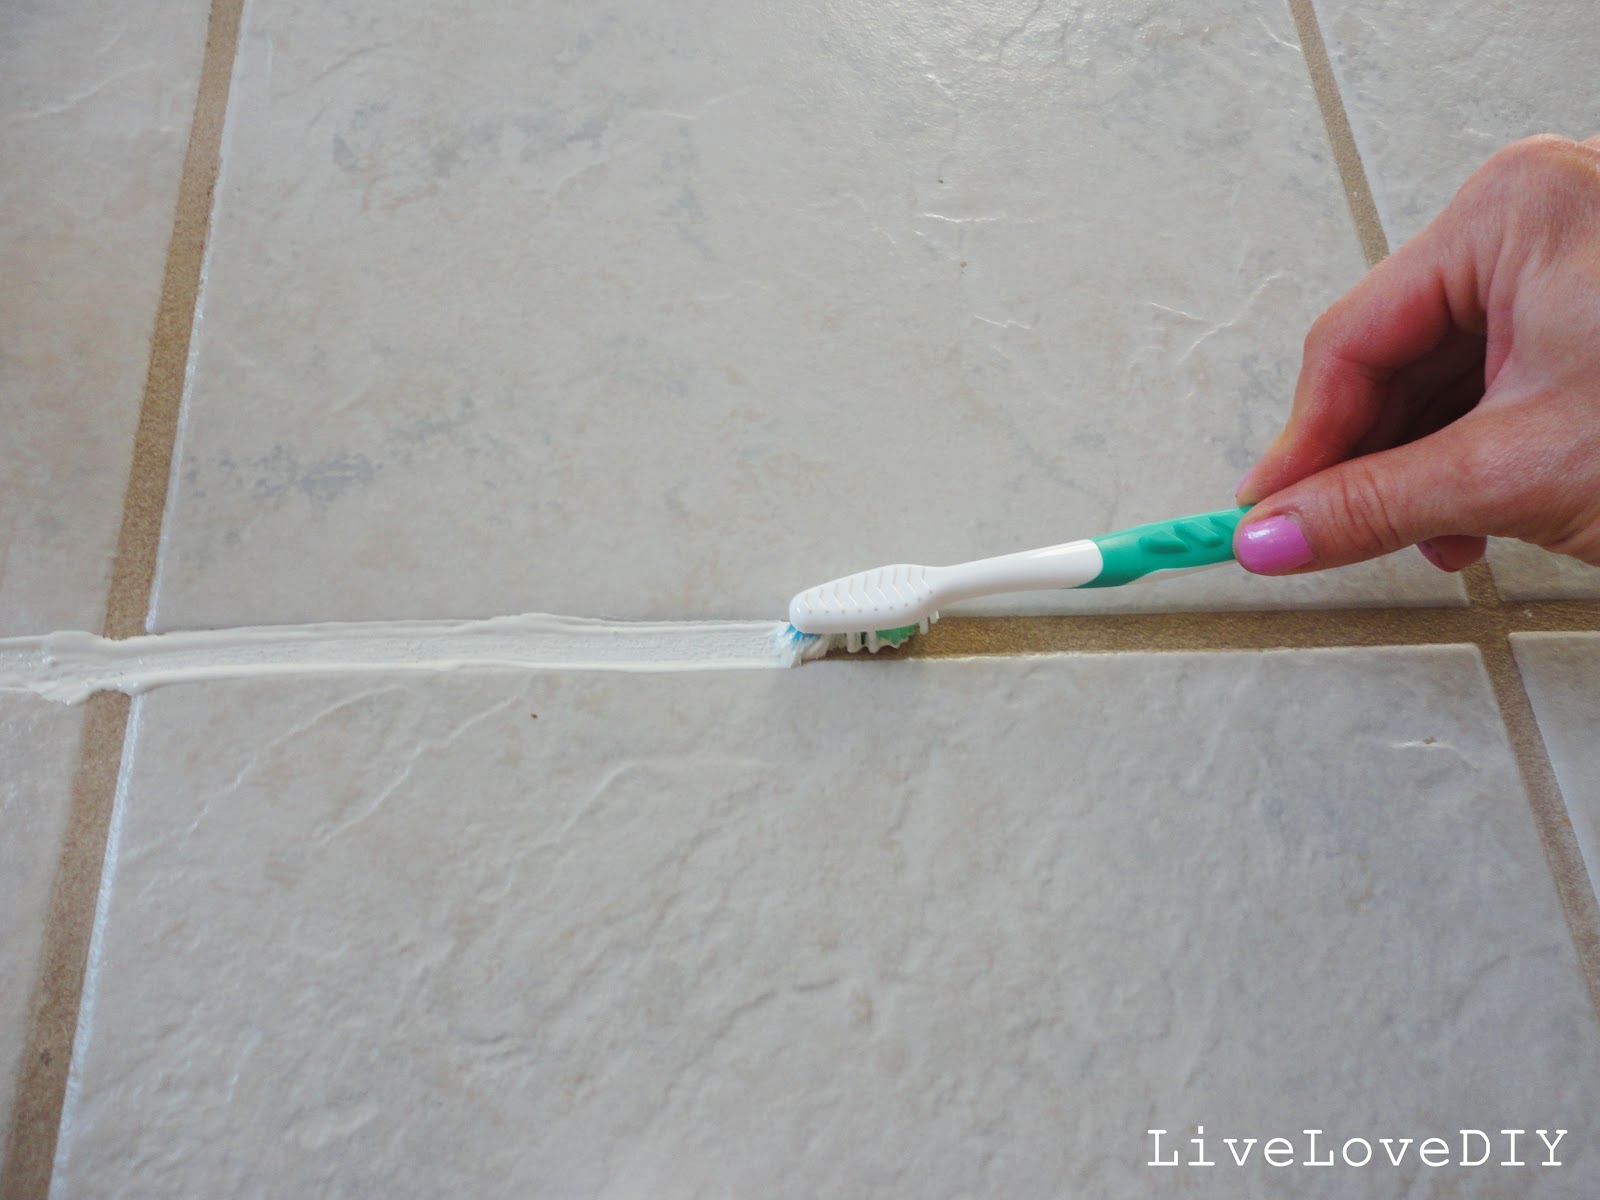 Use an old toothbrush to clean up the grout.